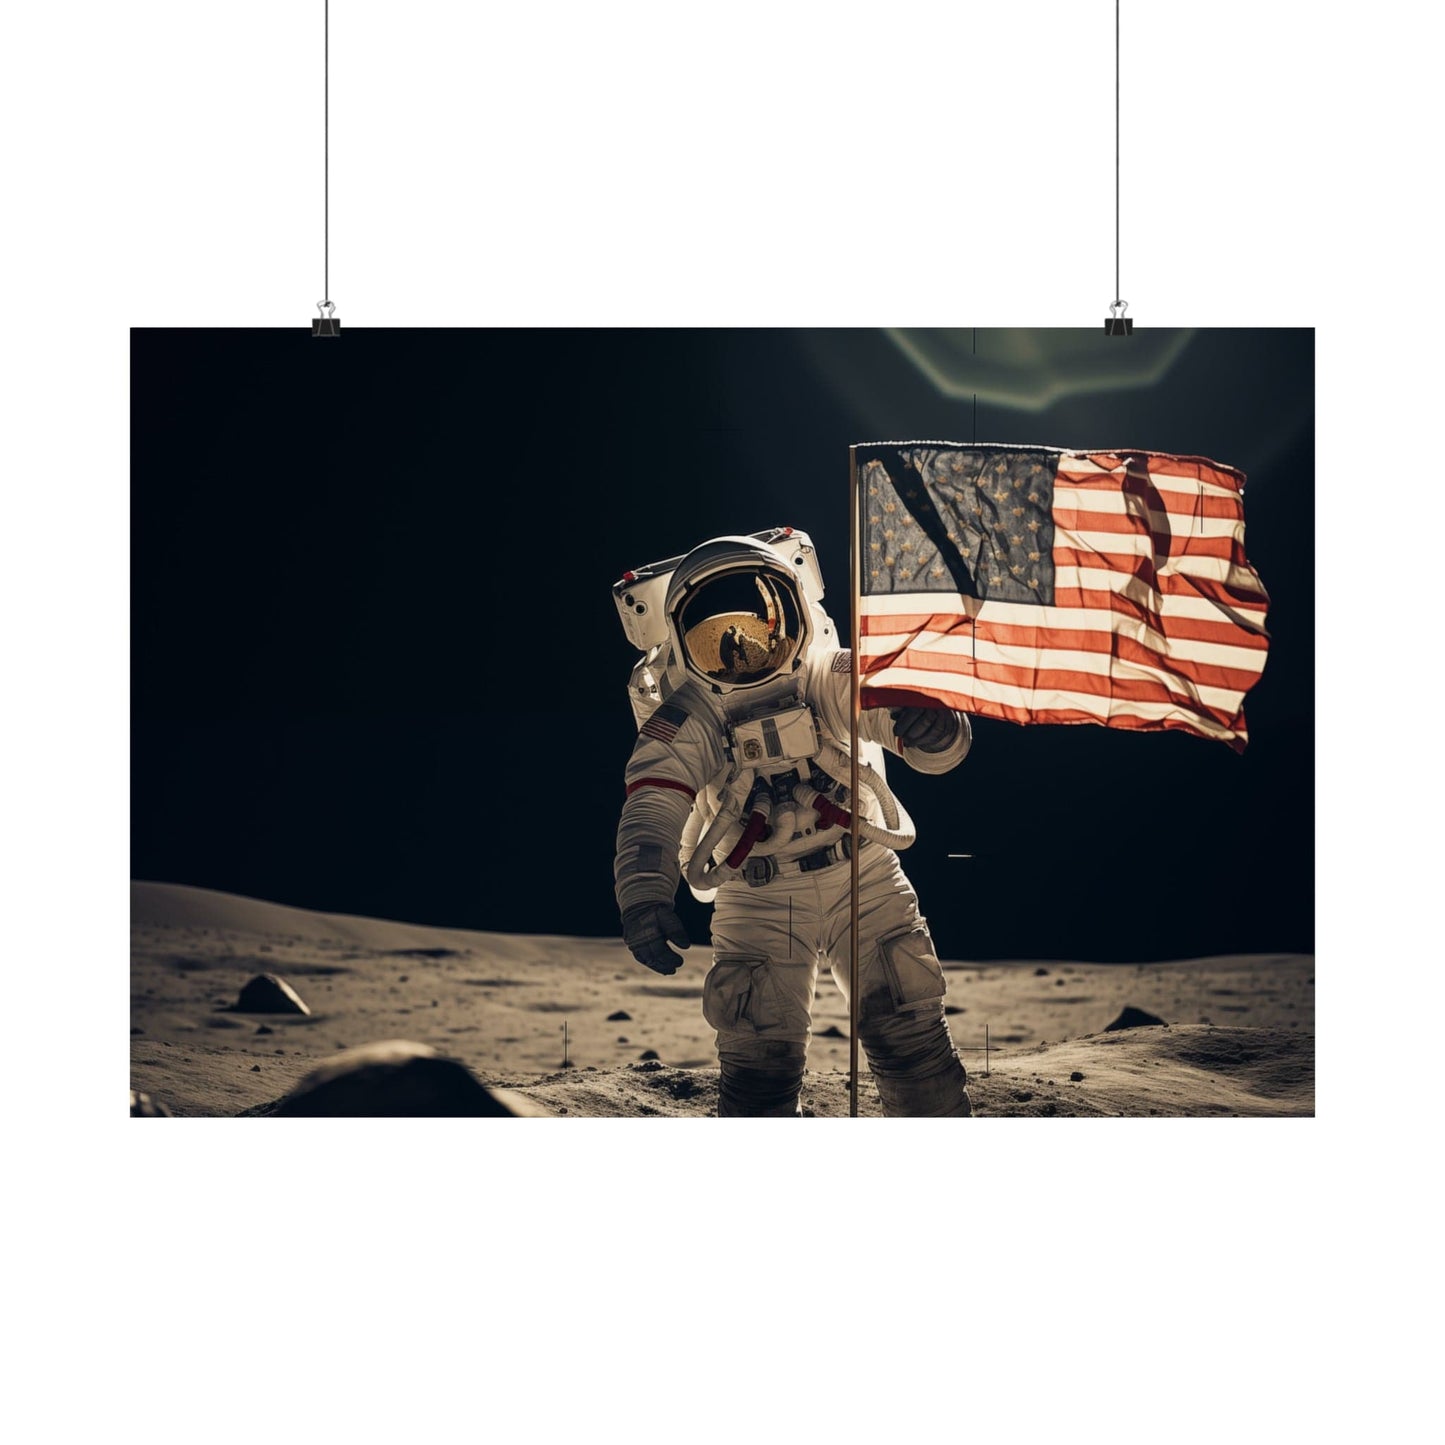 Poster 30″ x 20″ / Matte Moon Flag Planting Poster